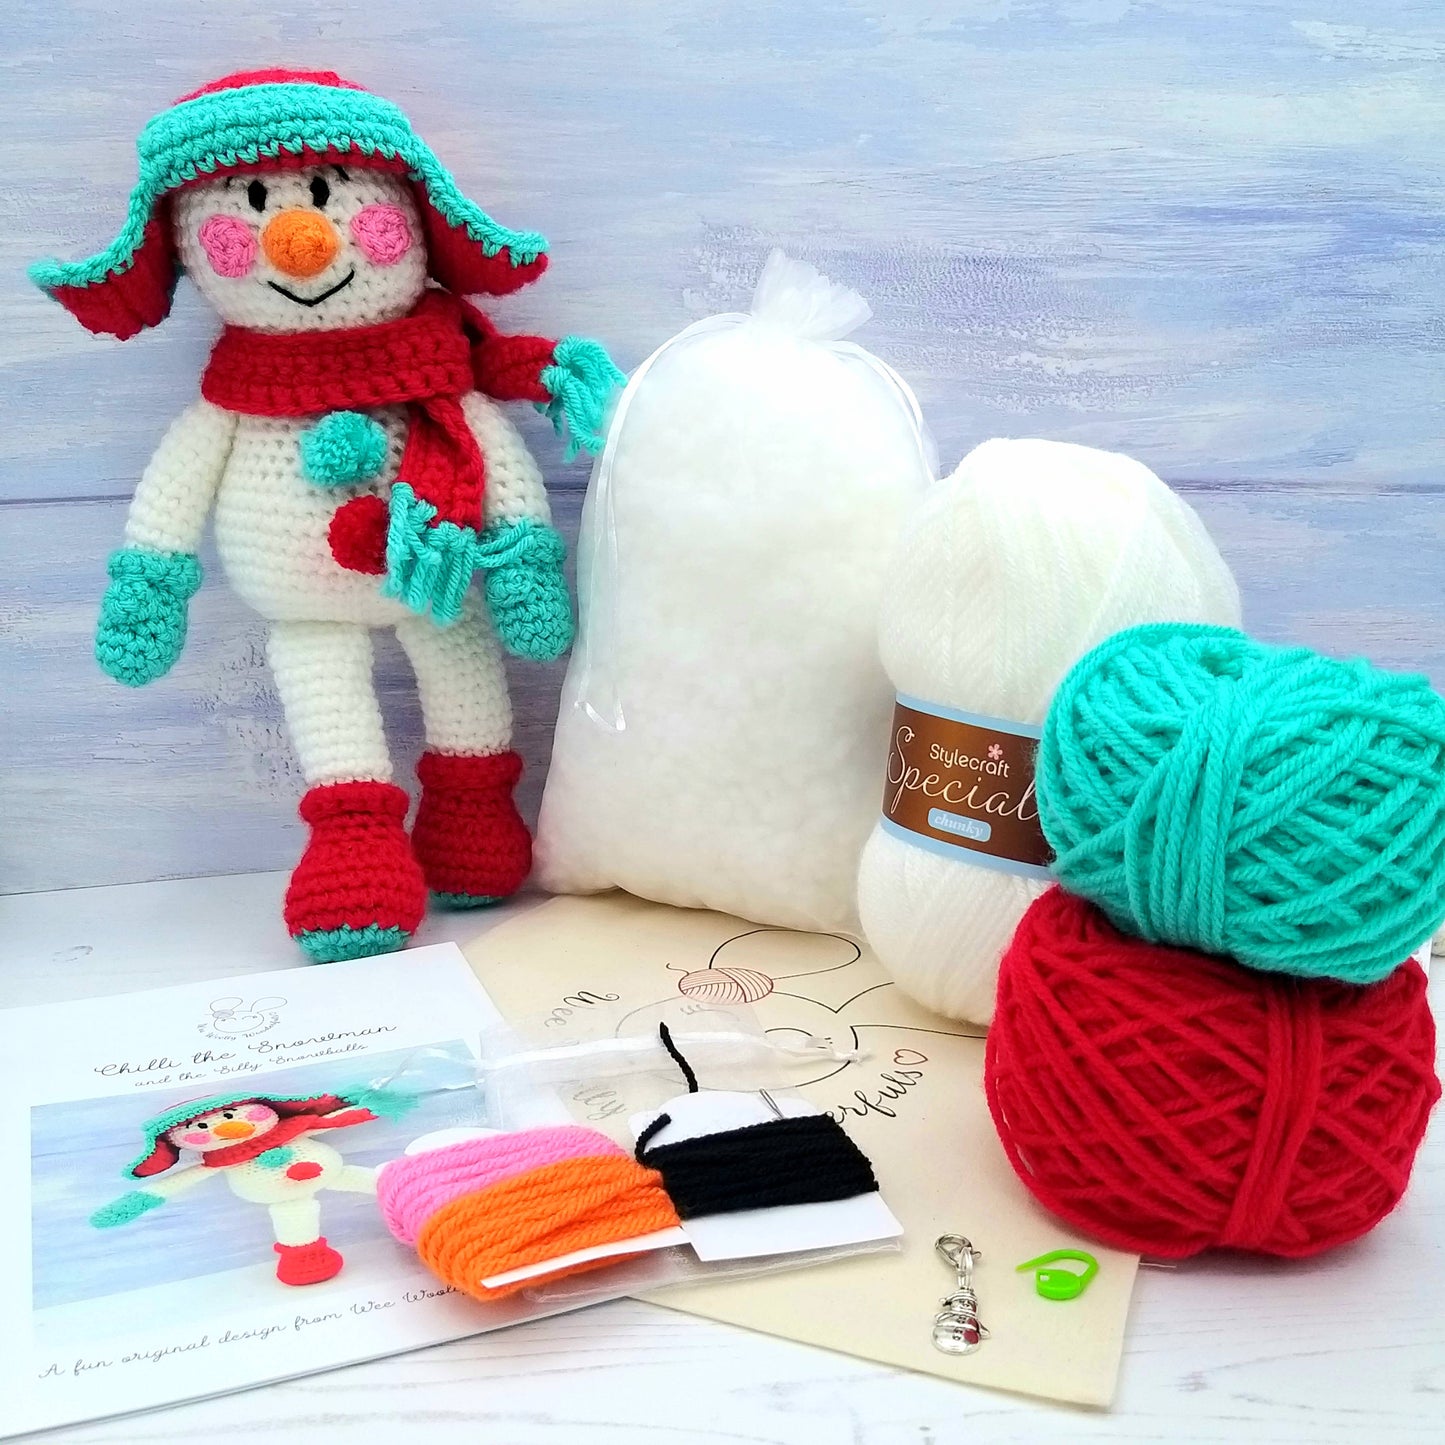 Crochet kit with contents